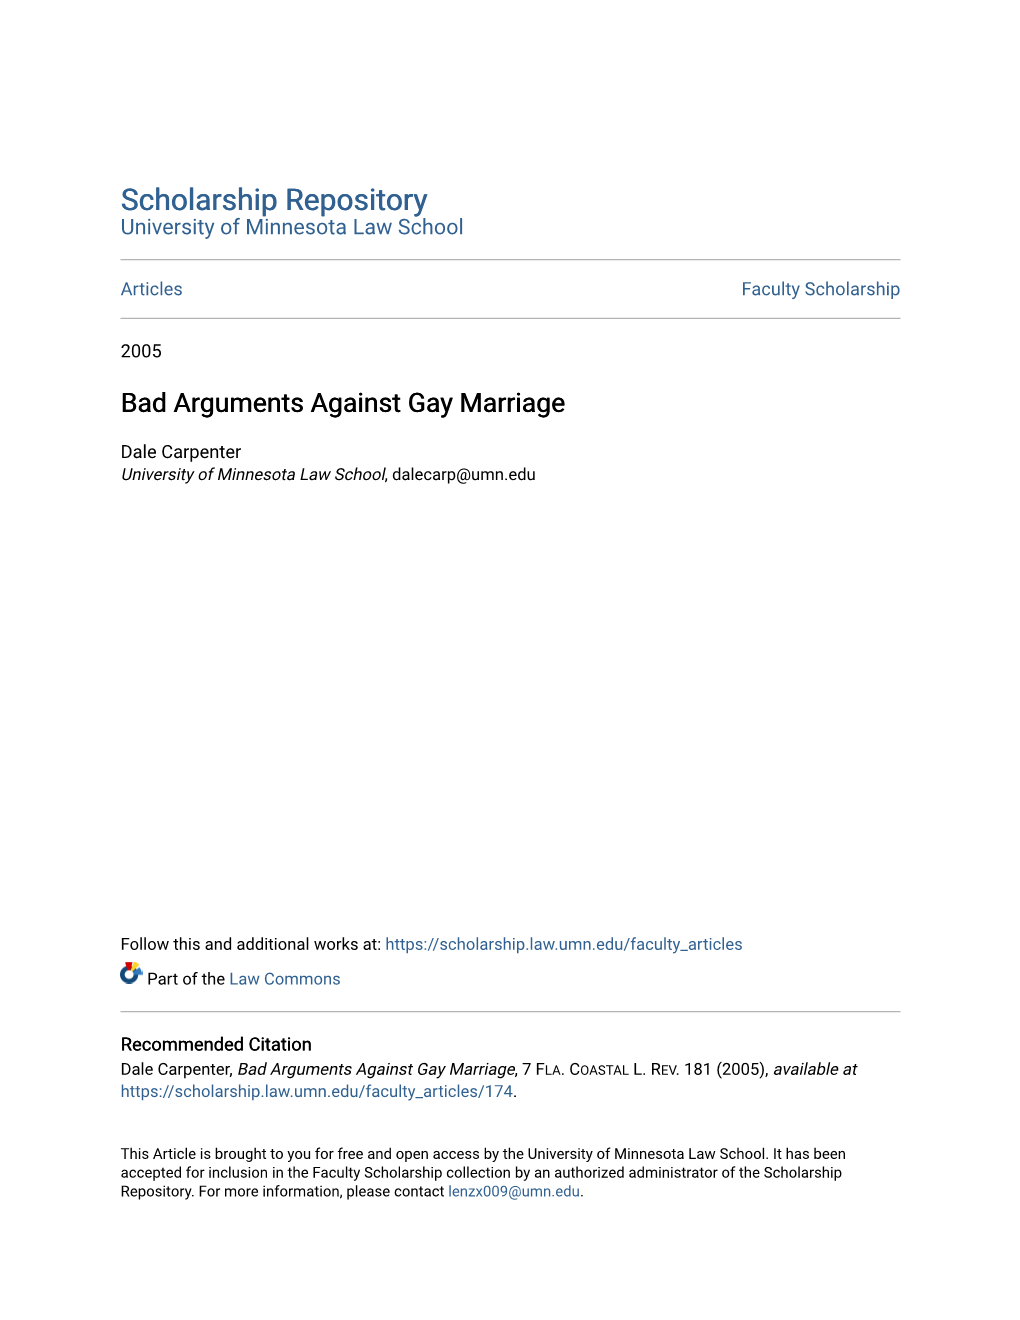 Bad Arguments Against Gay Marriage